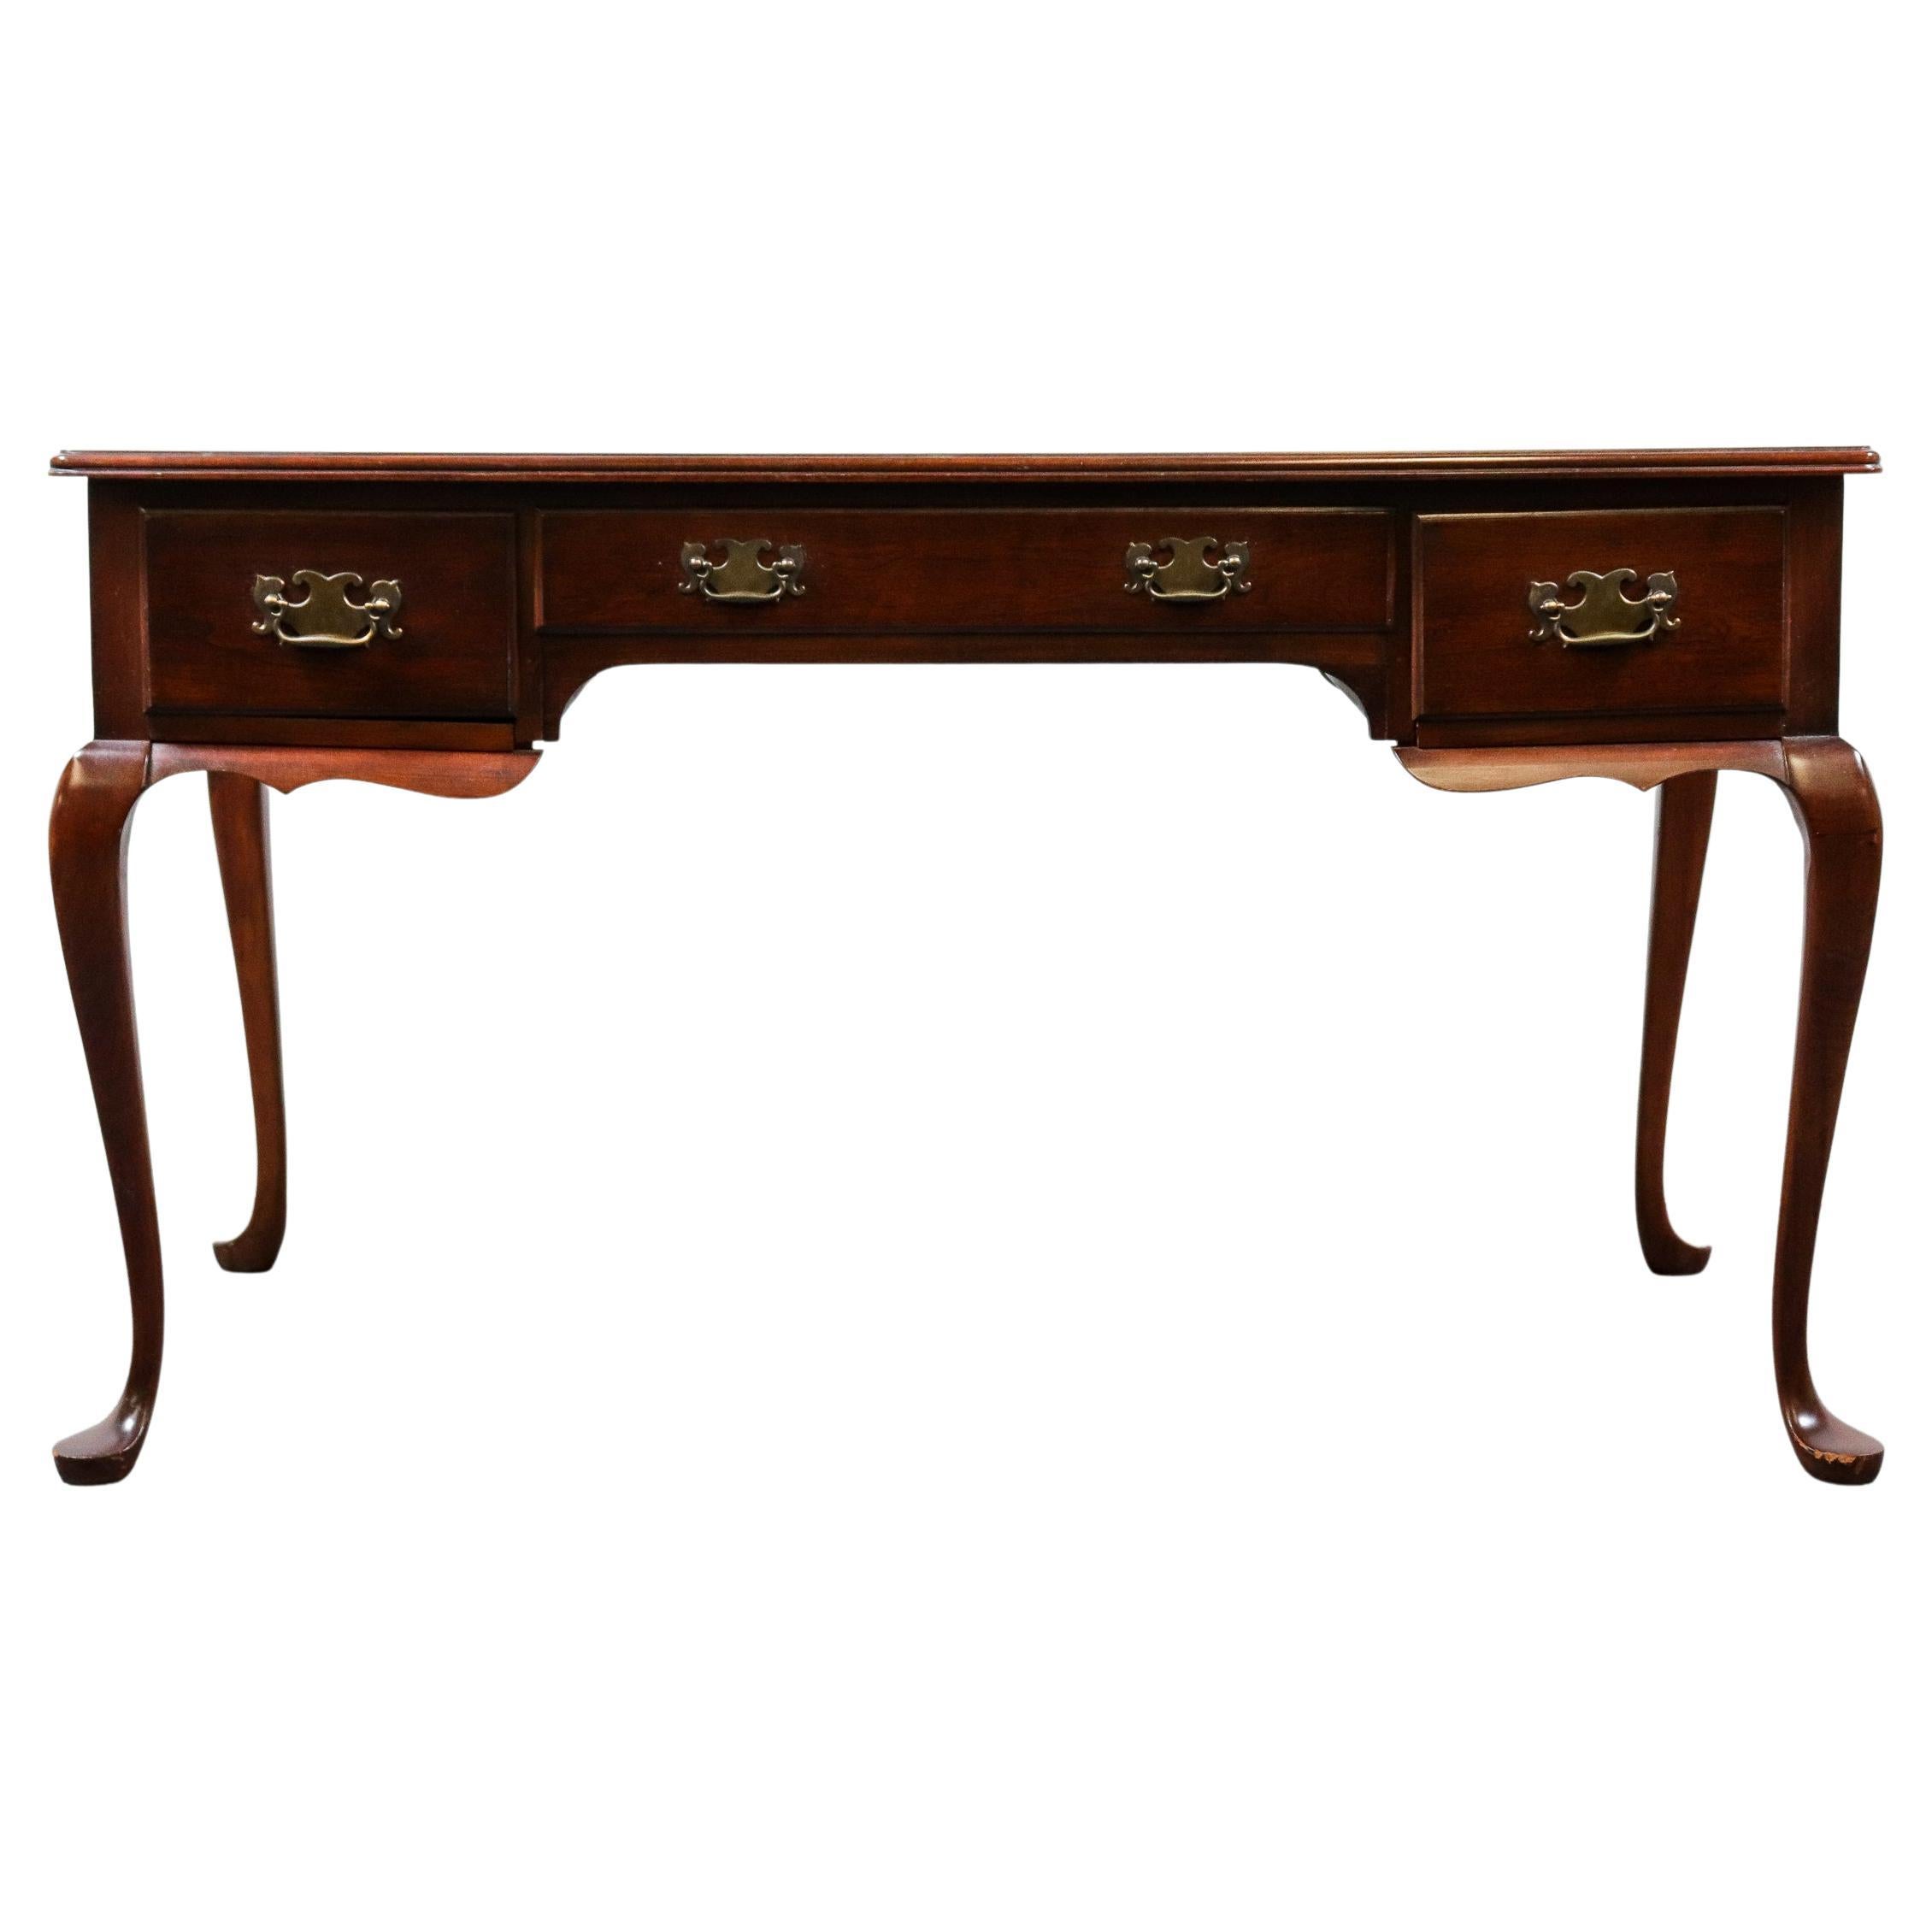 Queen Anne Style Writing Desk